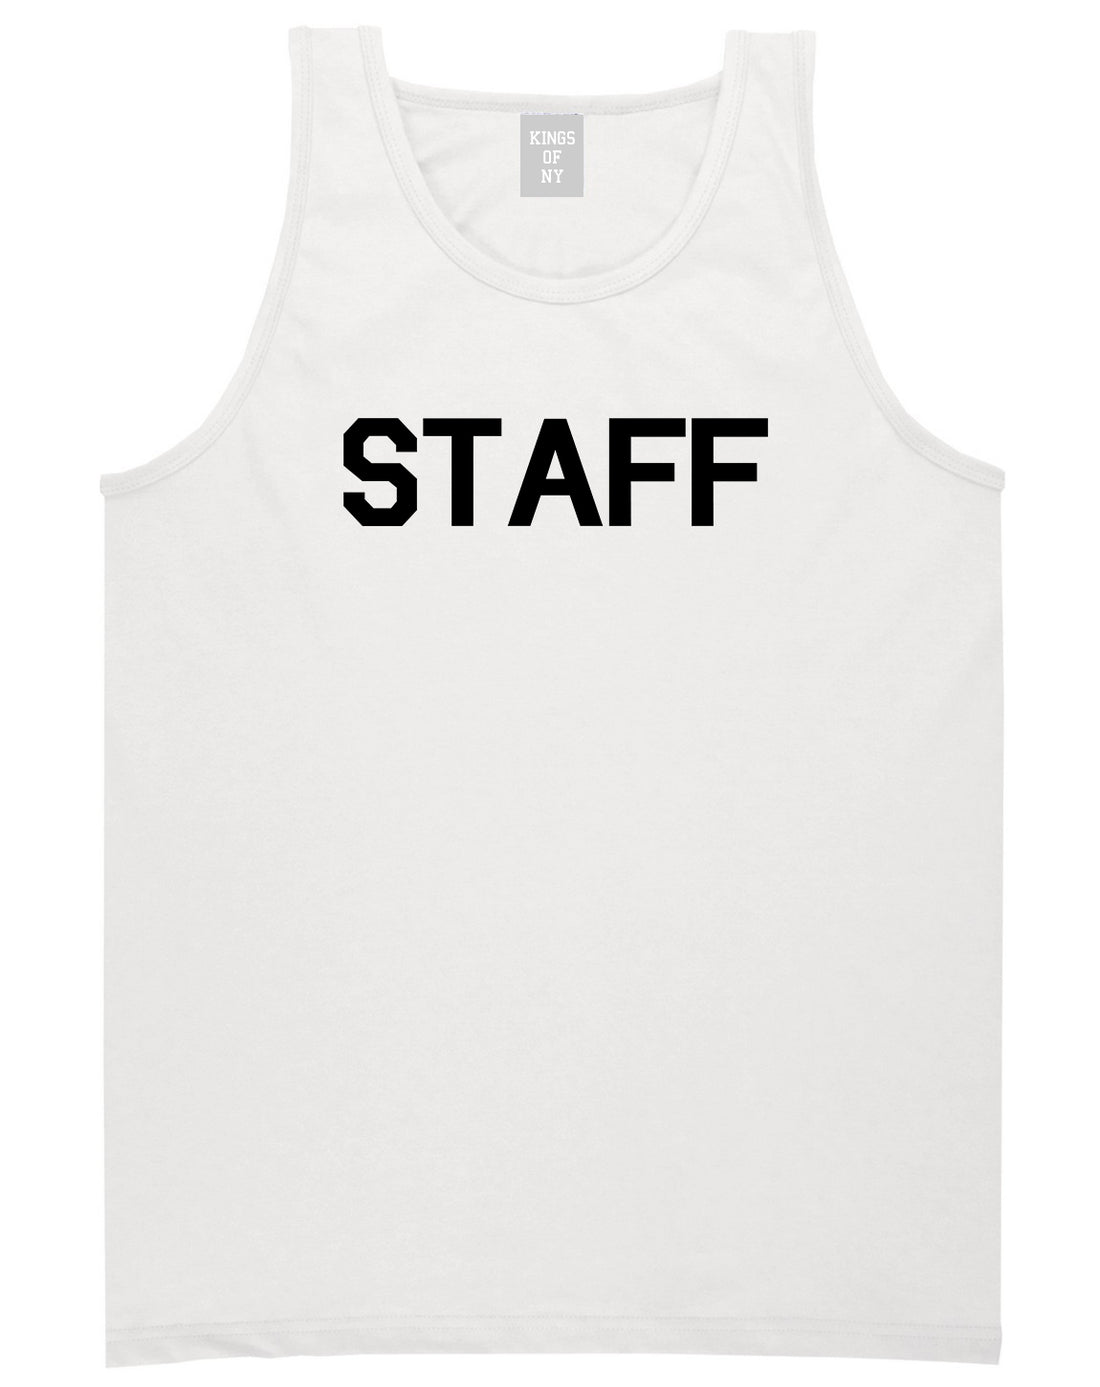 Staff Club Concert Event Mens White Tank Top Shirt by KINGS OF NY